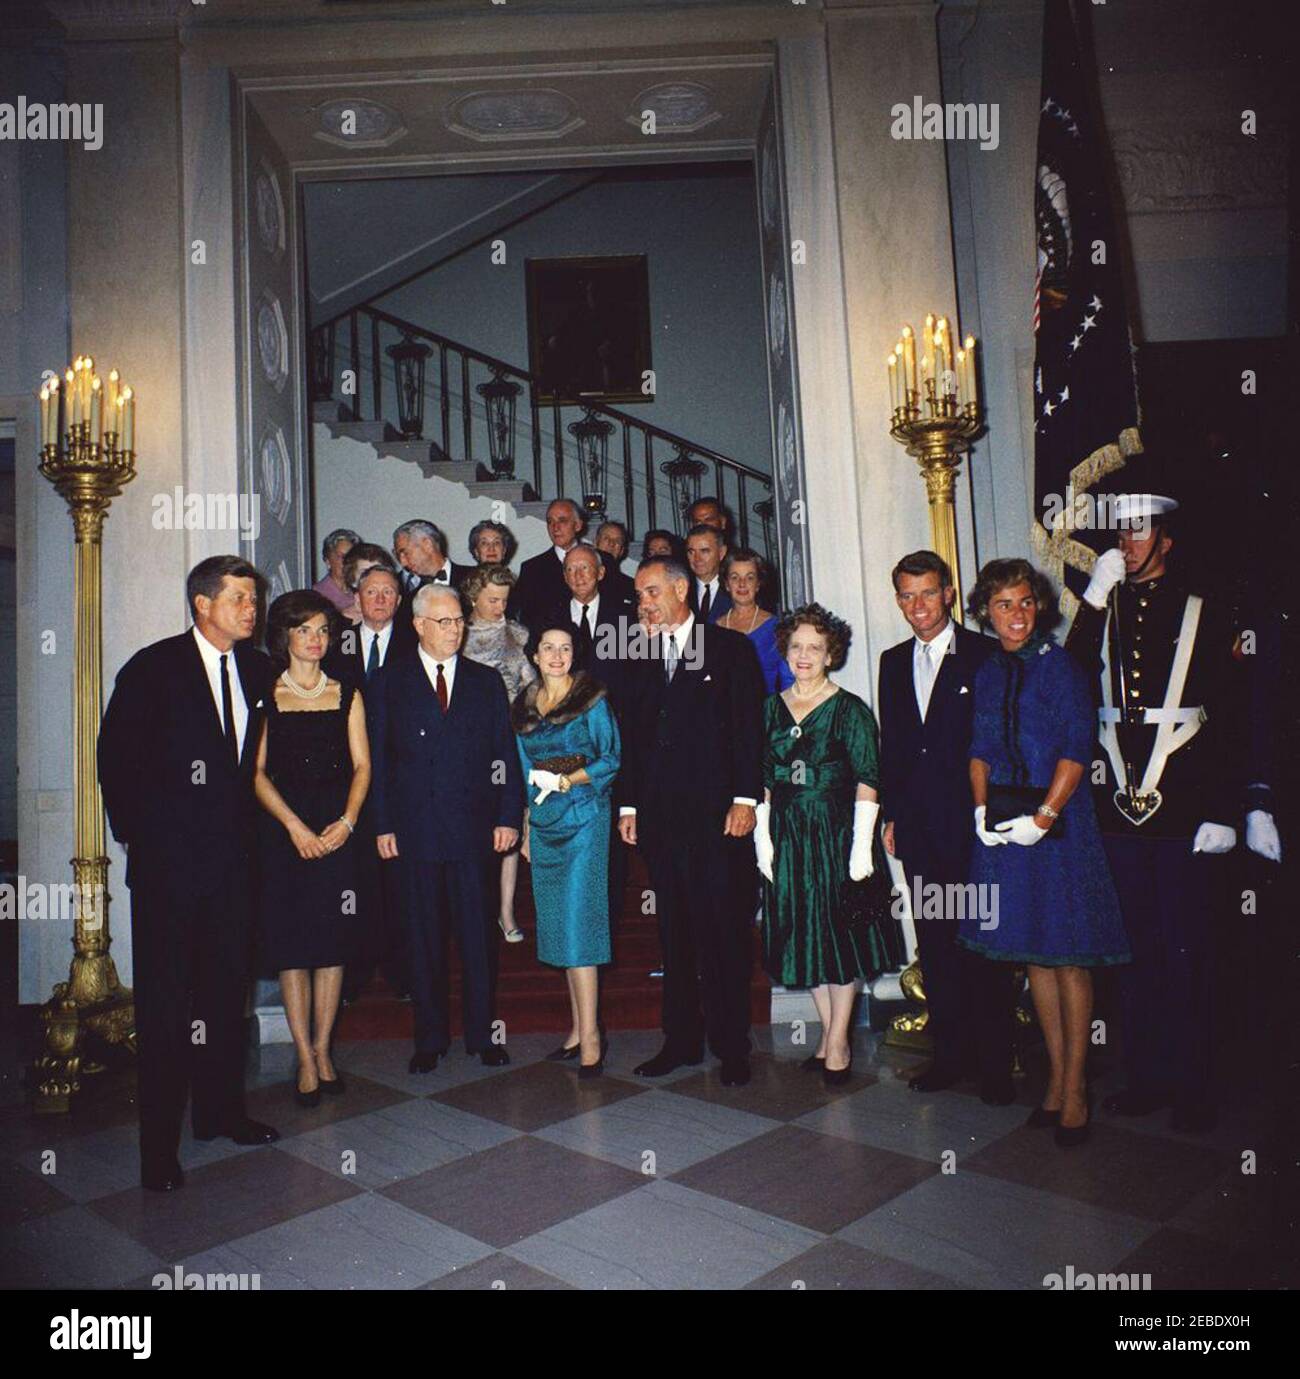 Judicial Reception, 6:00PM. White House reception for Judicial Branch. Front row (L u2013 R): President John F. Kennedy; First Lady Jacqueline Kennedy; Chief Justice Earl Warren; Lady Bird Johnson; Vice President Lyndon Johnson; Nina Warren, wife of Chief Justice Warren; Attorney General Robert F. Kennedy; Ethel Kennedy; unidentified color guard officer. Second row (L u2013 R): Supreme Court Associate Justice William O. Douglas; Mercedes Douglas, wife of Justice Douglas; Supreme Court Associate Justice Hugo Black; Elizabeth Black, wife of Justice Black (mostly hidden behind Vice President Jo Stock Photo